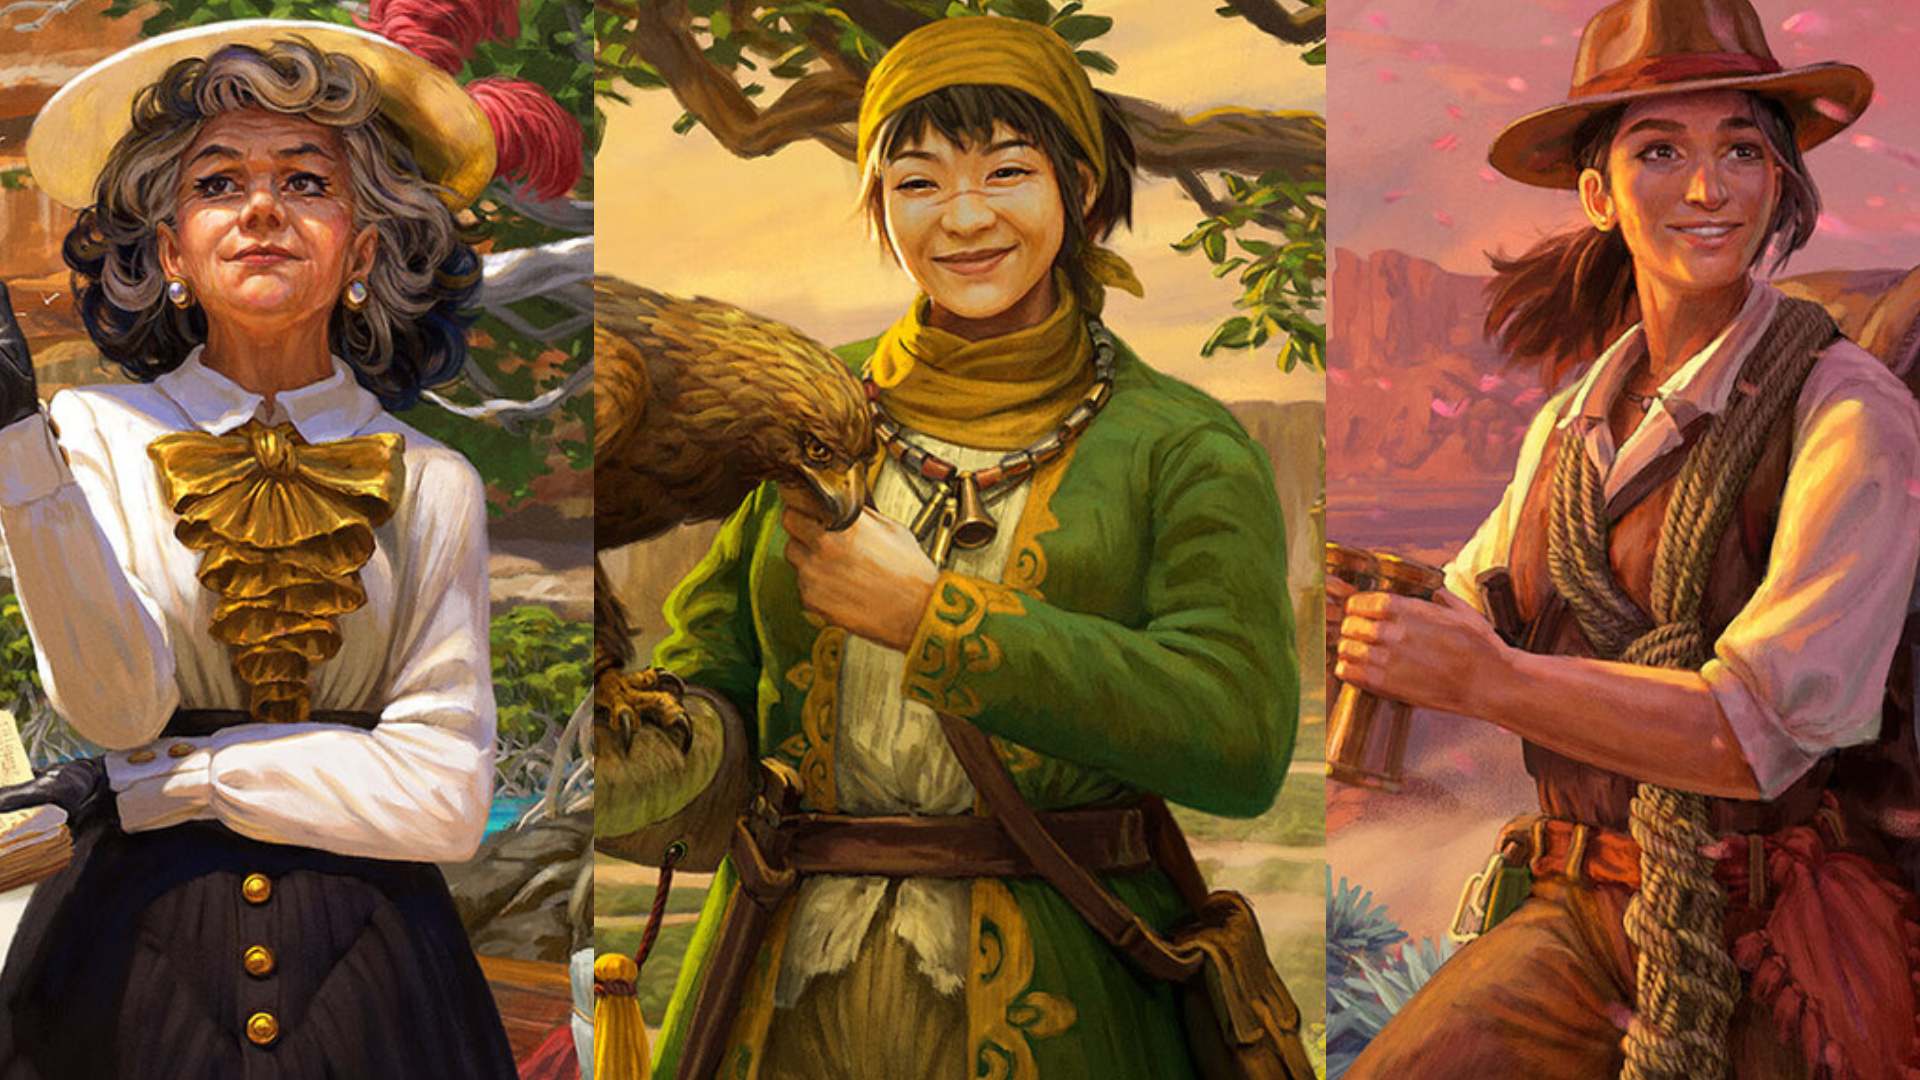 /blogs/news/celebrating-women-in-gaming-this-international-womens-day